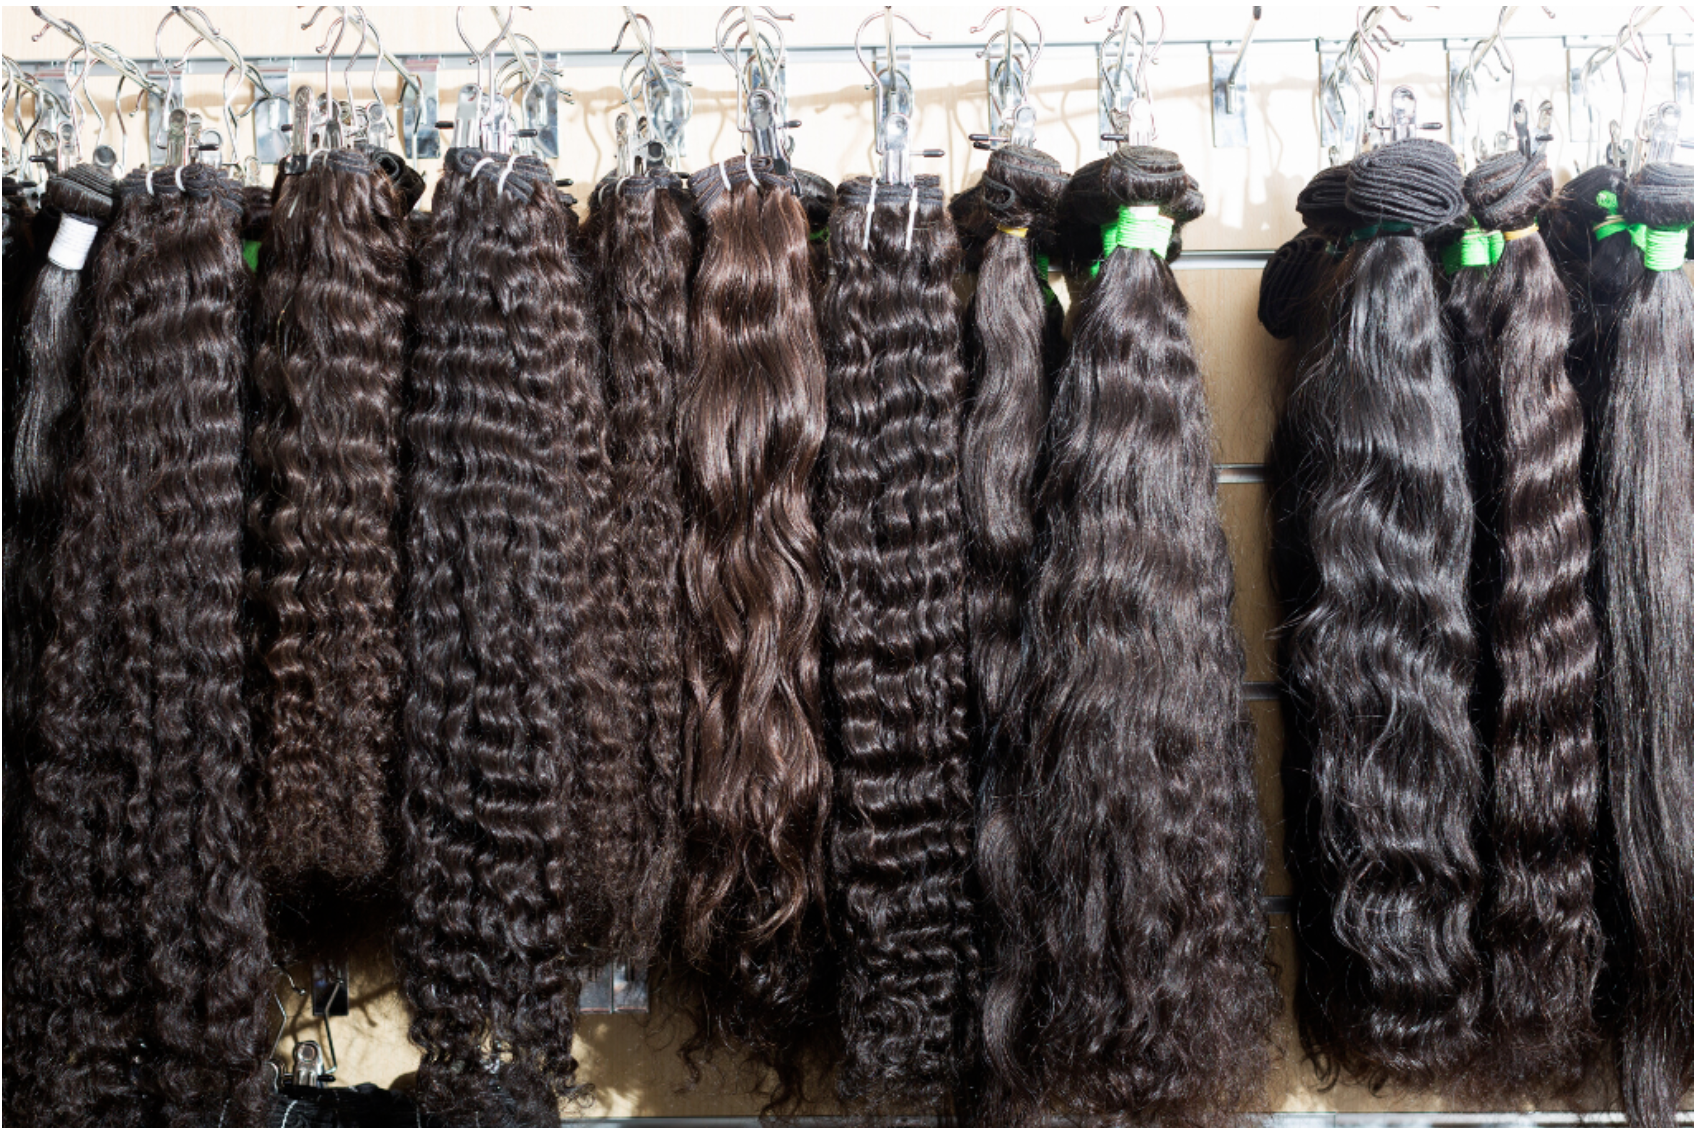 Raw Hair Extensions Hanging on Display